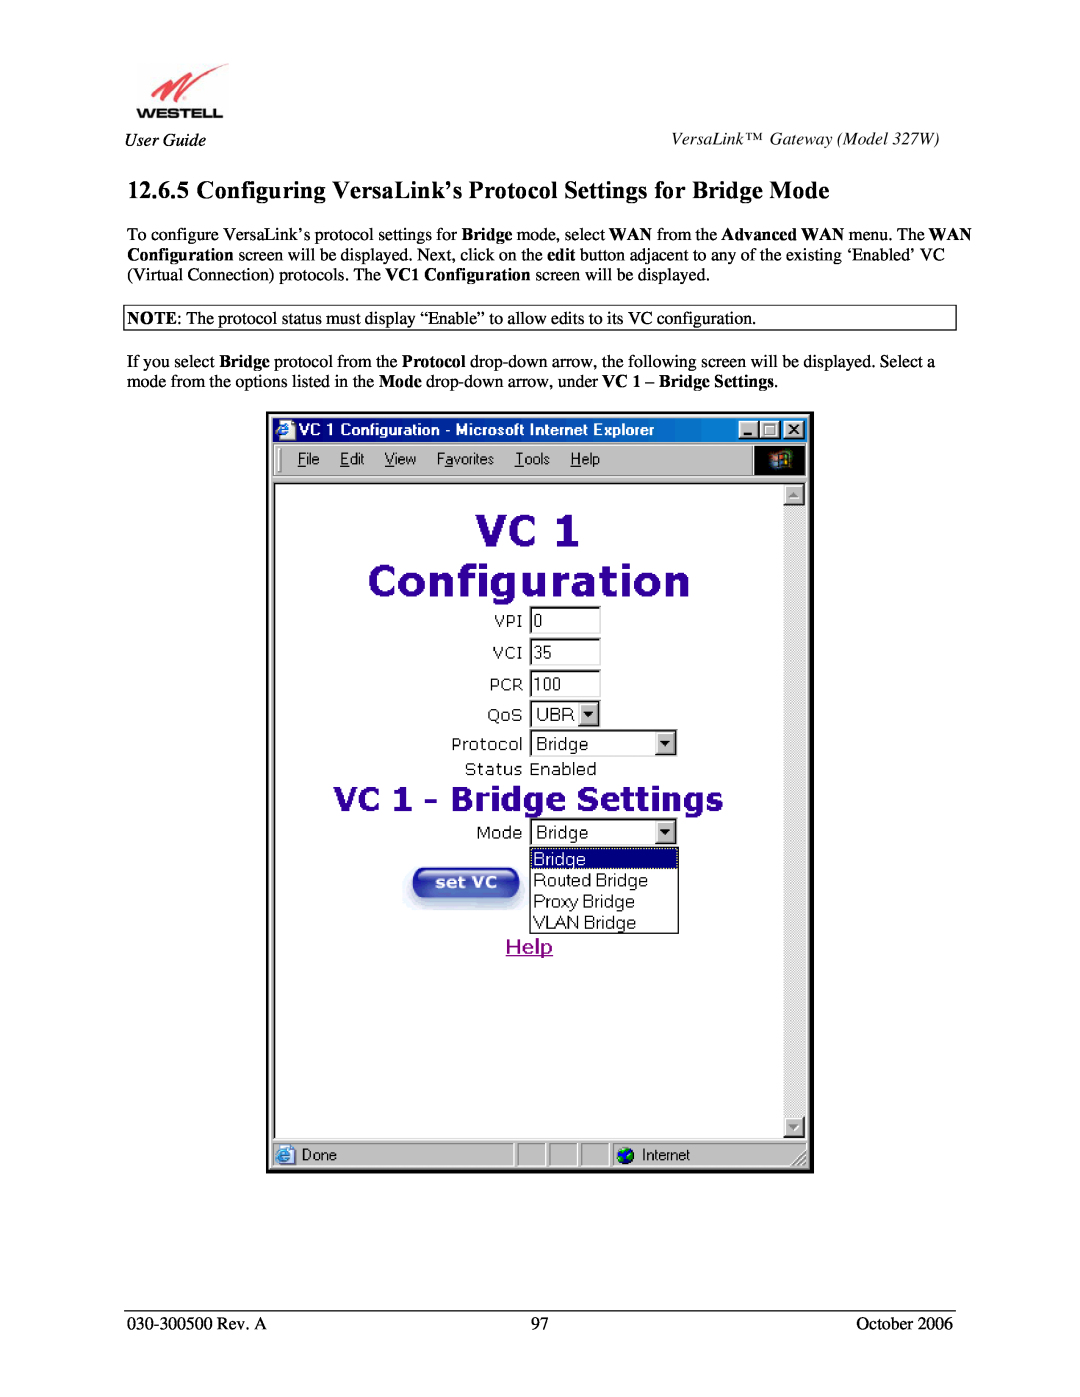 Westell Technologies 327W manual Configuring VersaLink’s Protocol Settings for Bridge Mode 